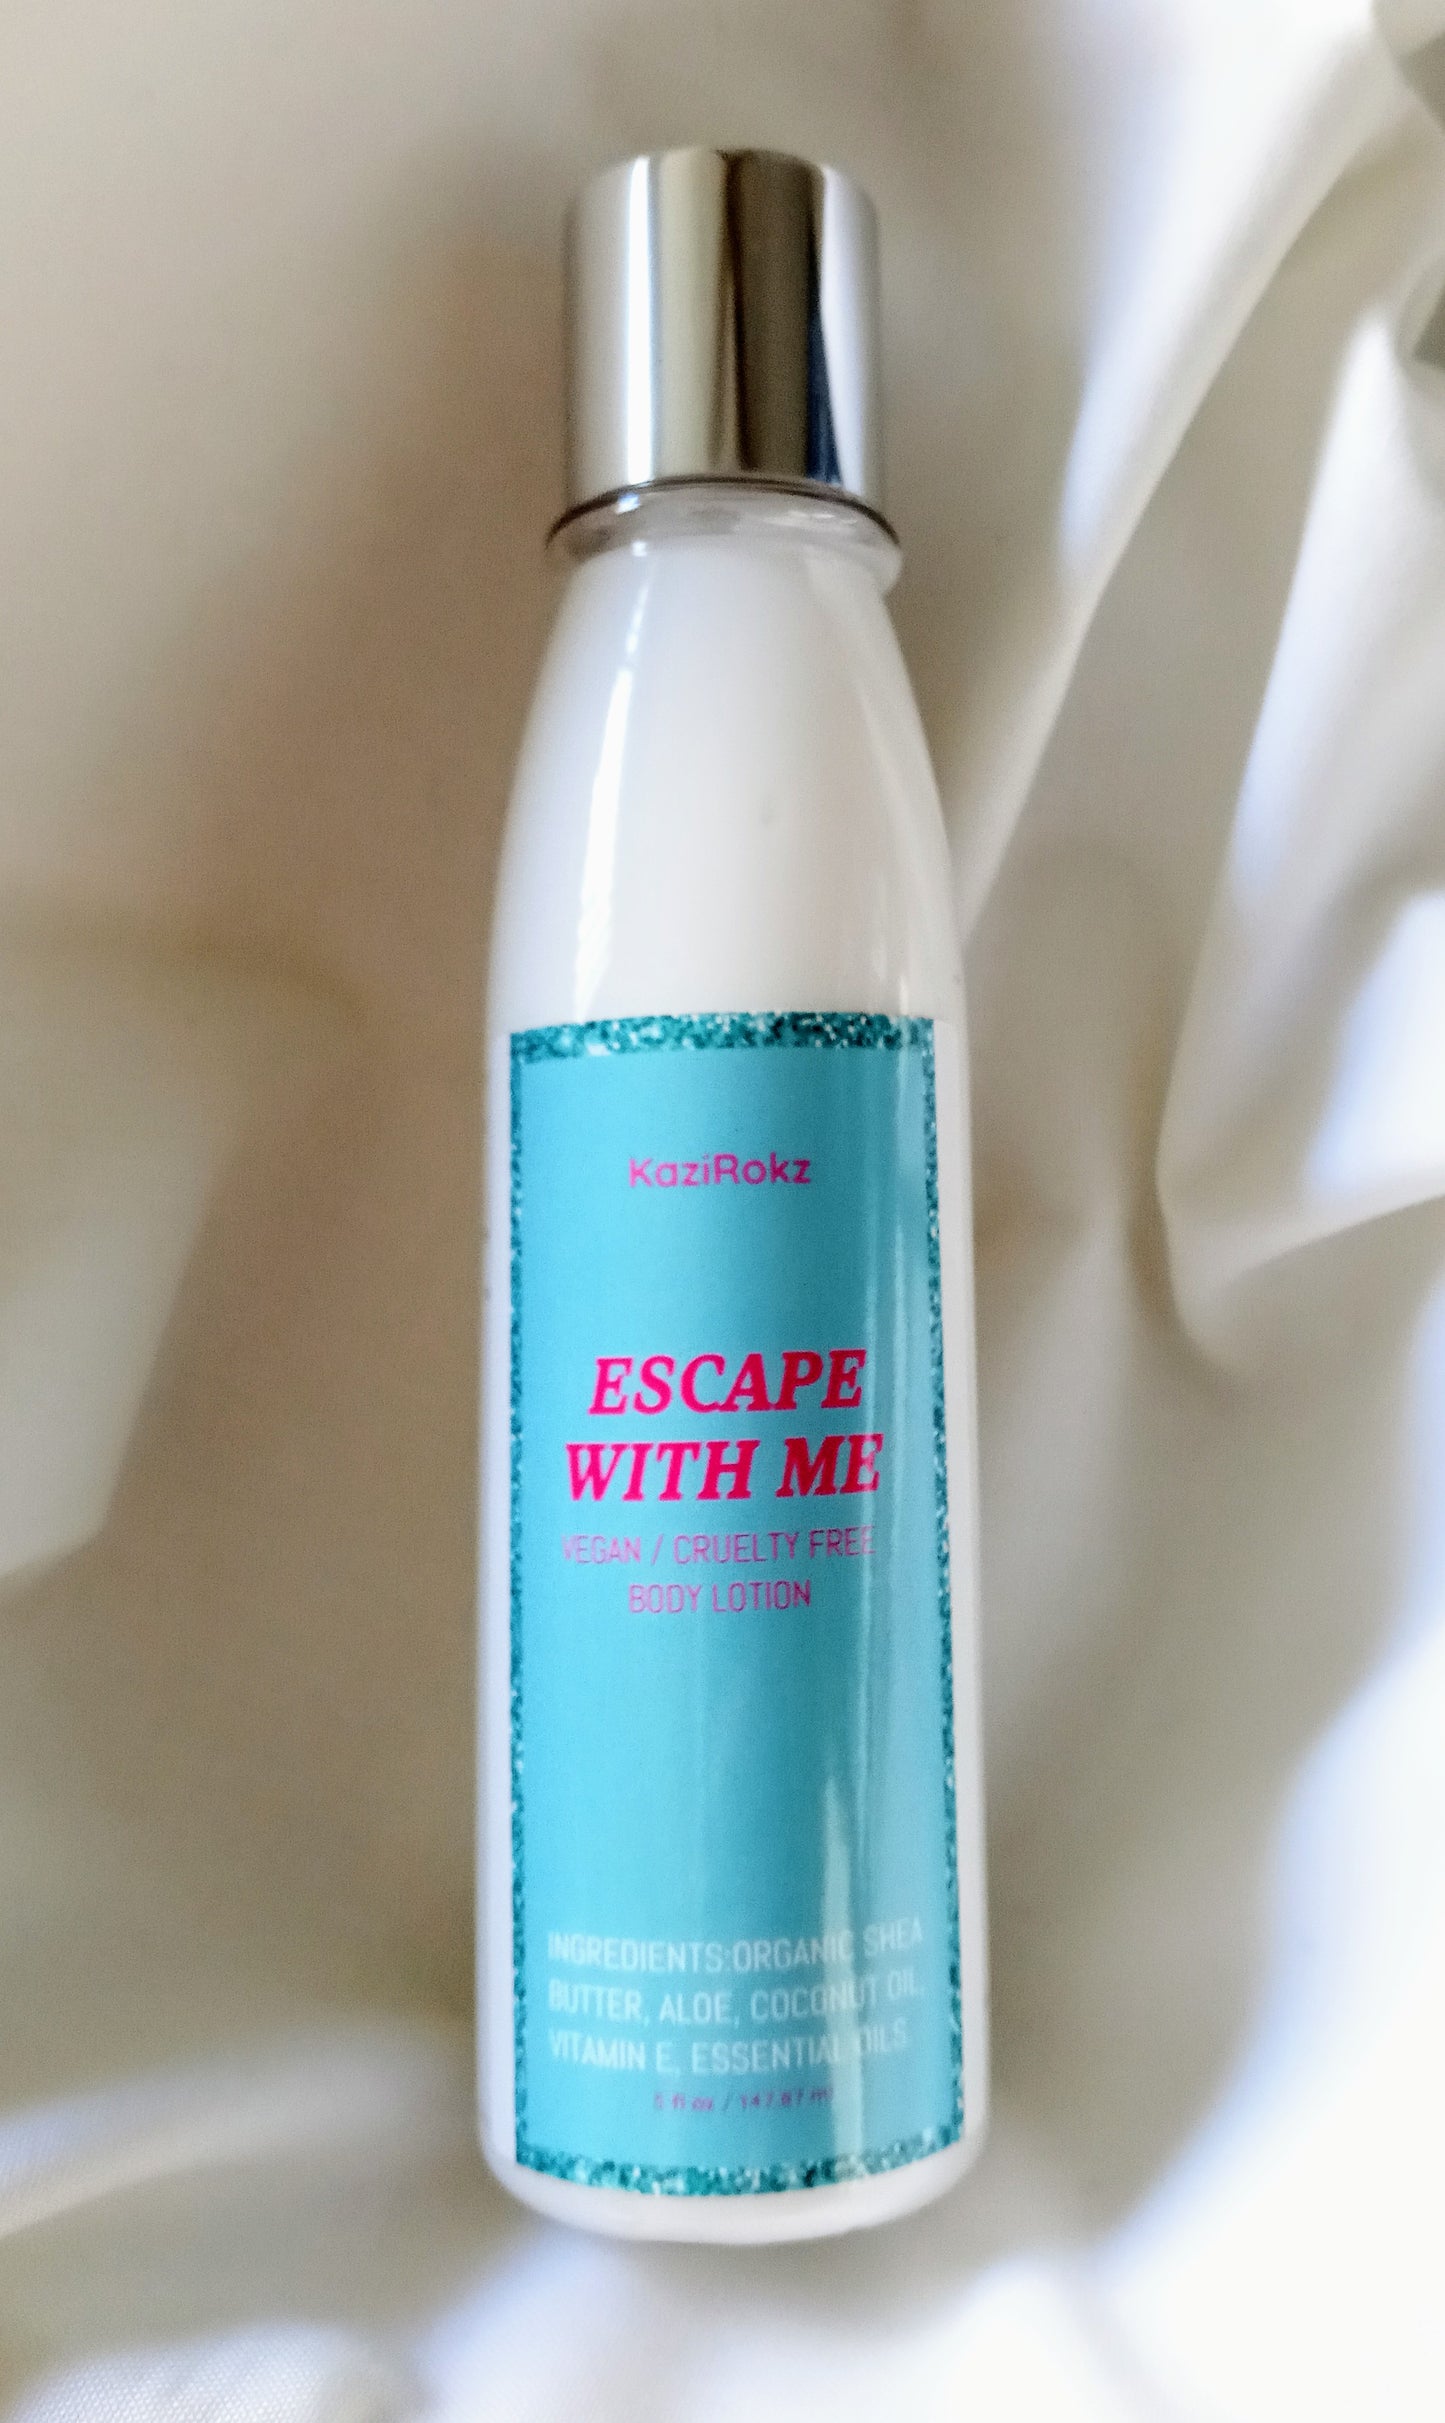 Escape With Me (100% Vegan / Cruelty Free) Fragrance Body Lotion